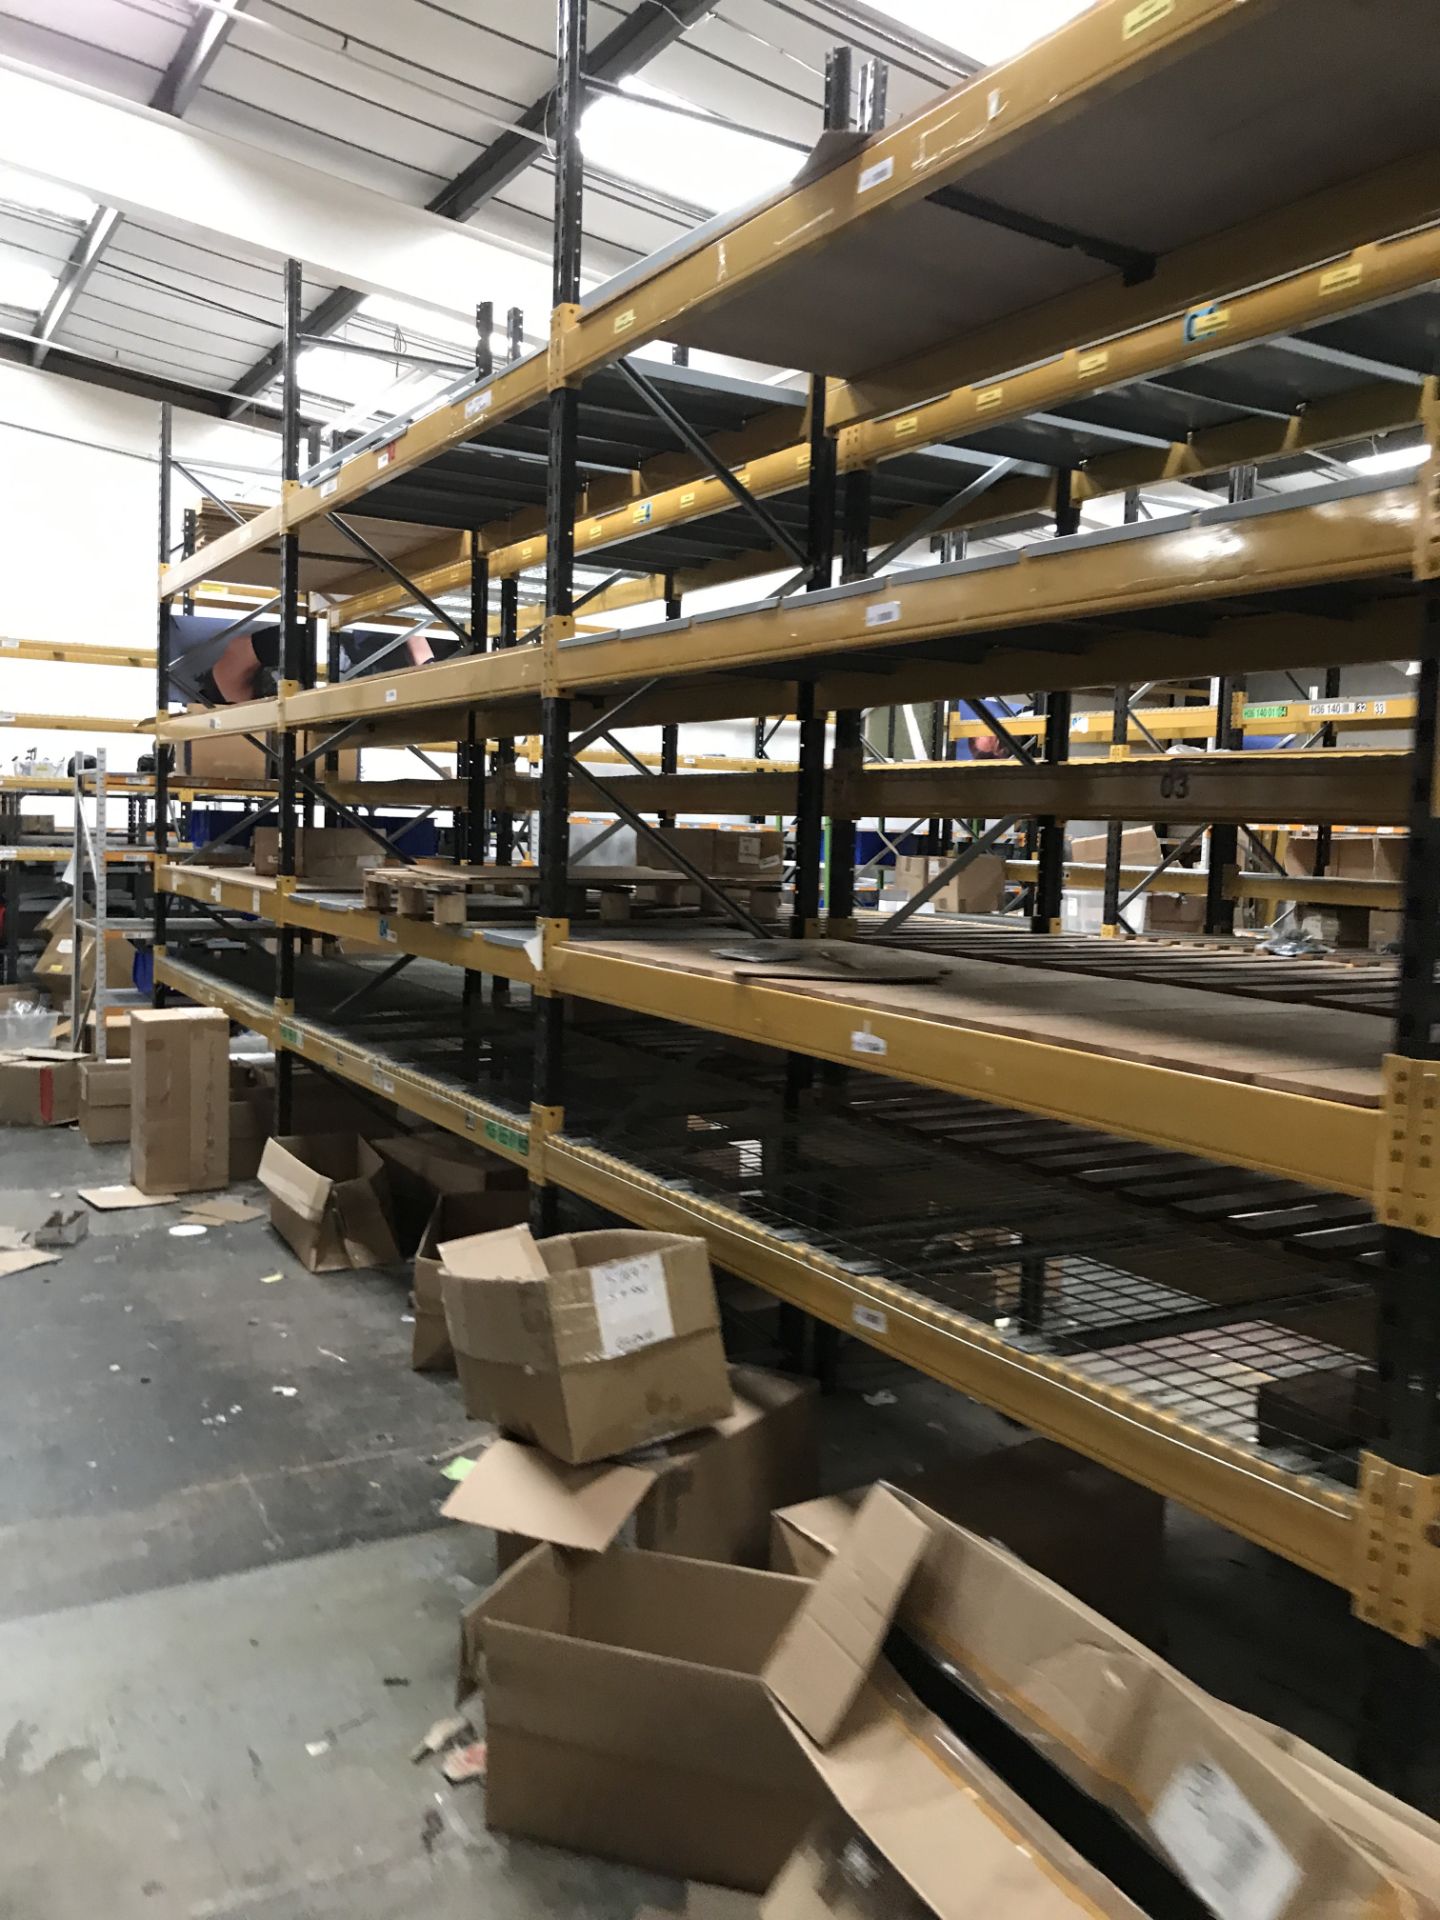 Link 51 11-Bay Mainly Five-Tier Boltless Pallet Racking, each bay approx. 2.8m long x 4m high x - Image 16 of 19